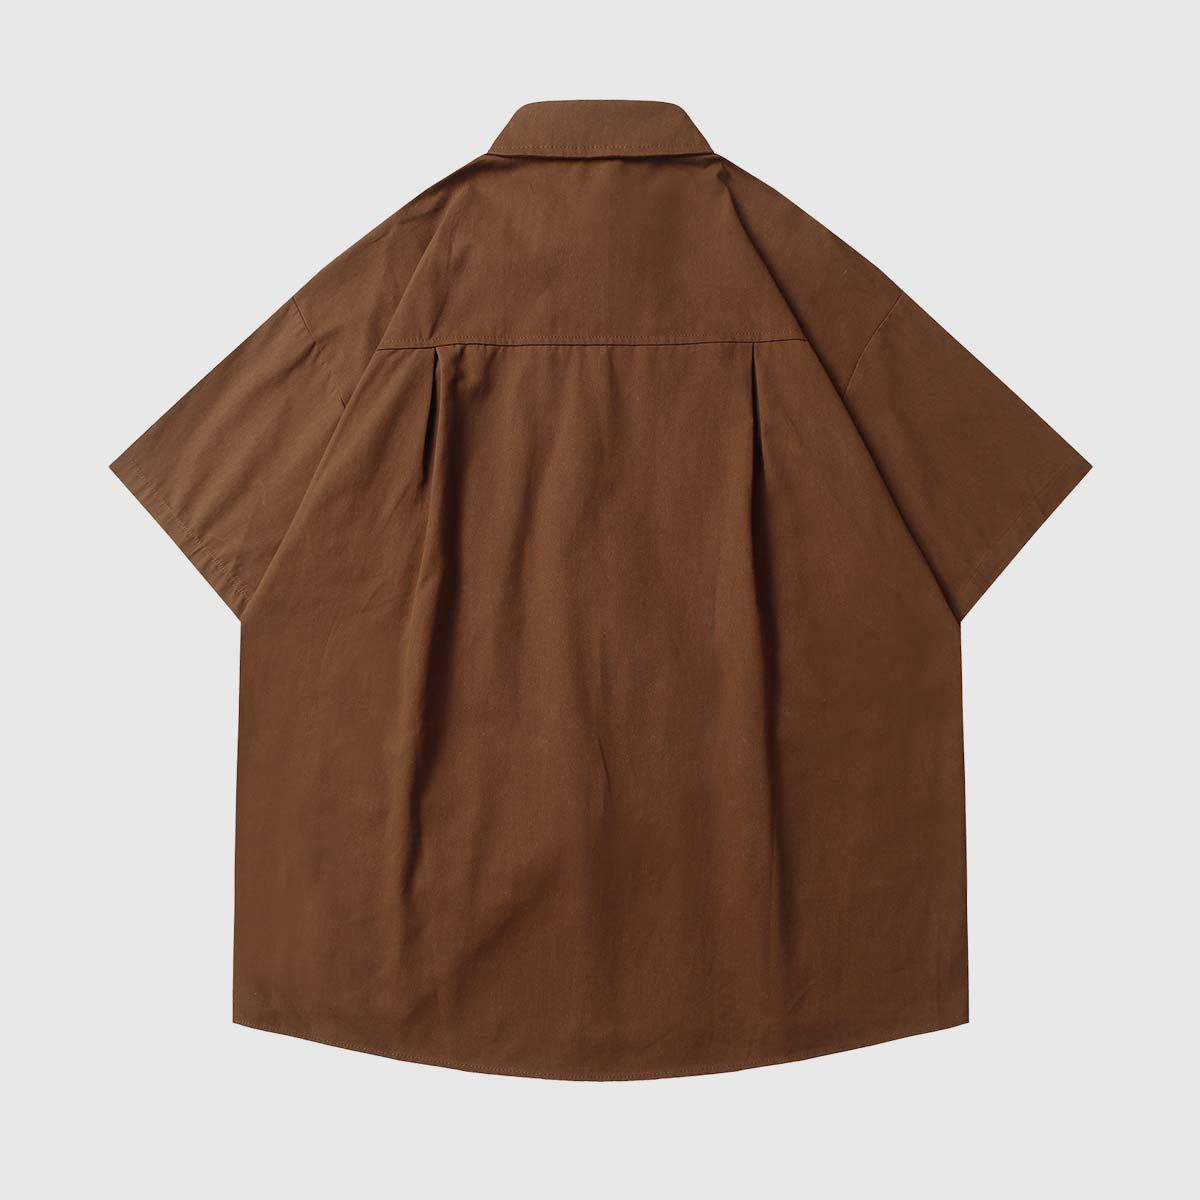 Back view of the brown unisex embroidered cat short sleeve shirt in brown